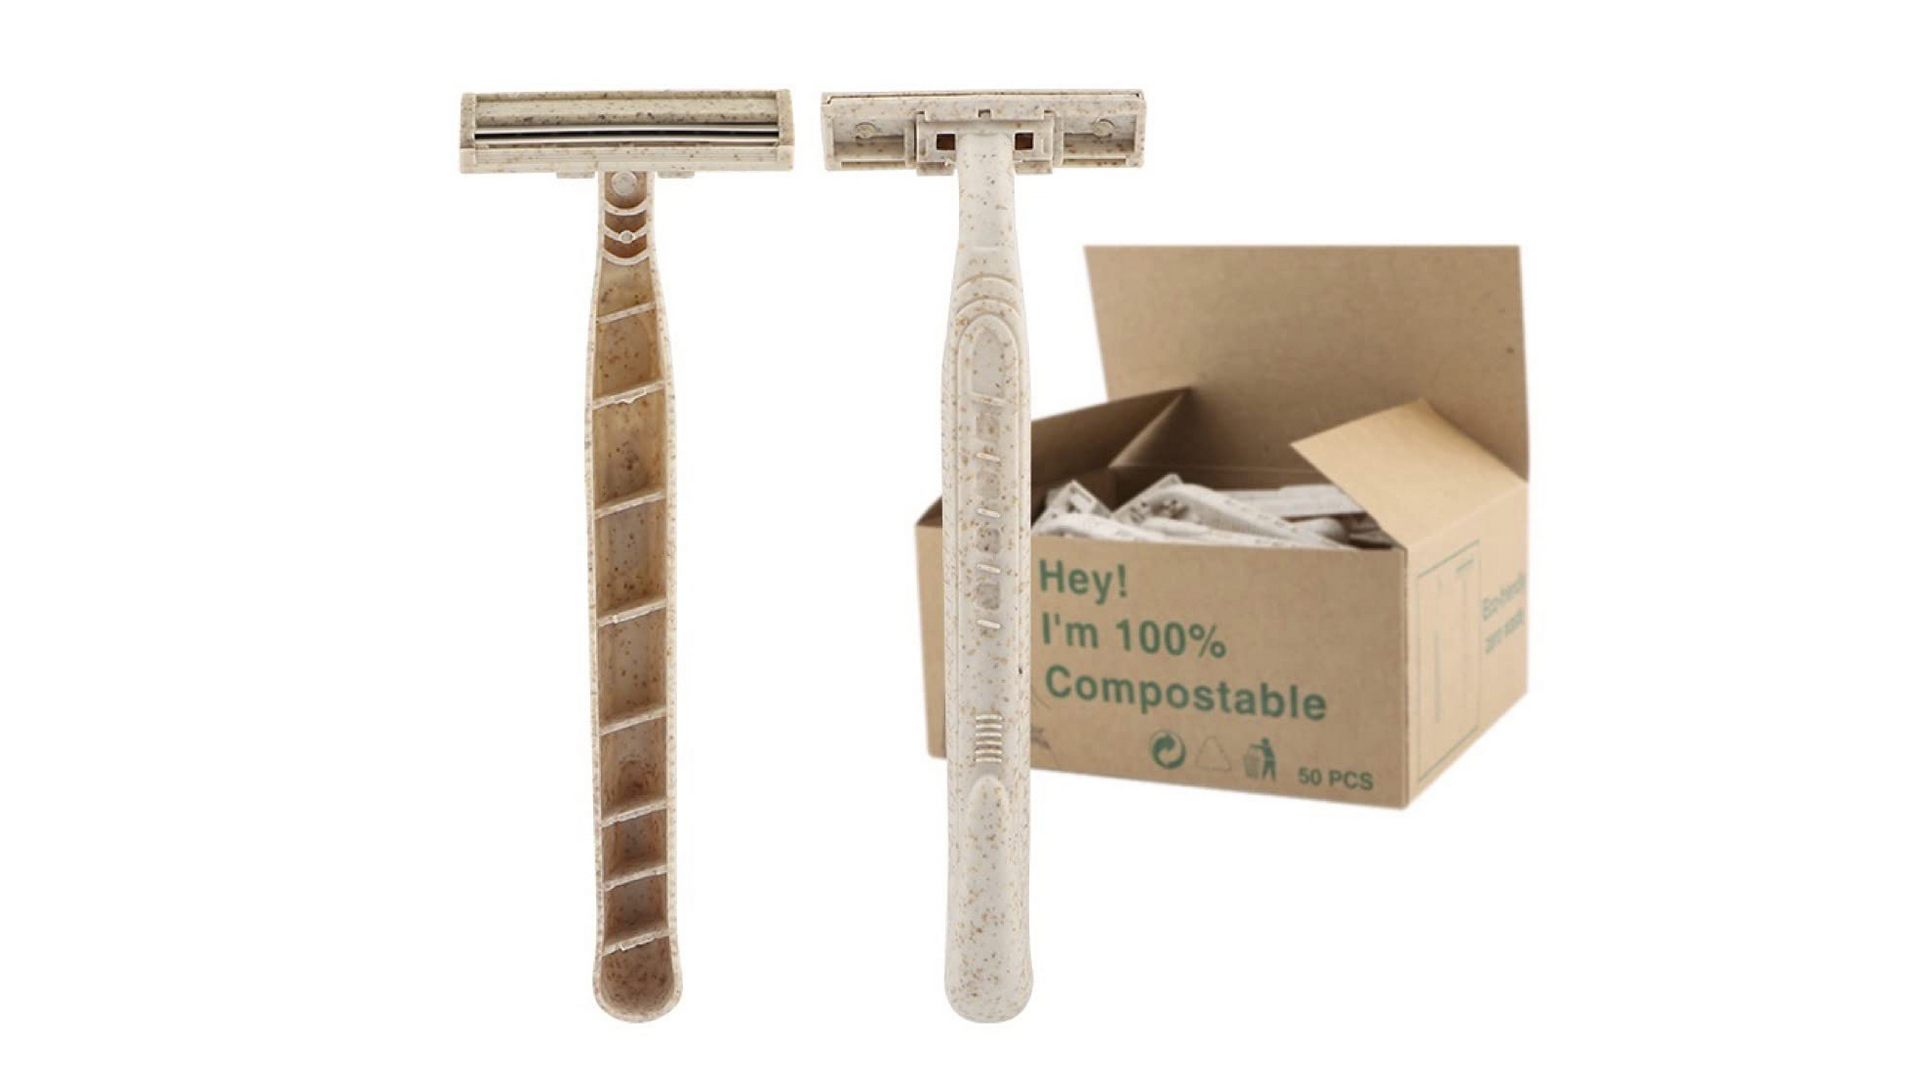 safety razor made of wheat straw, which is eco-friendly